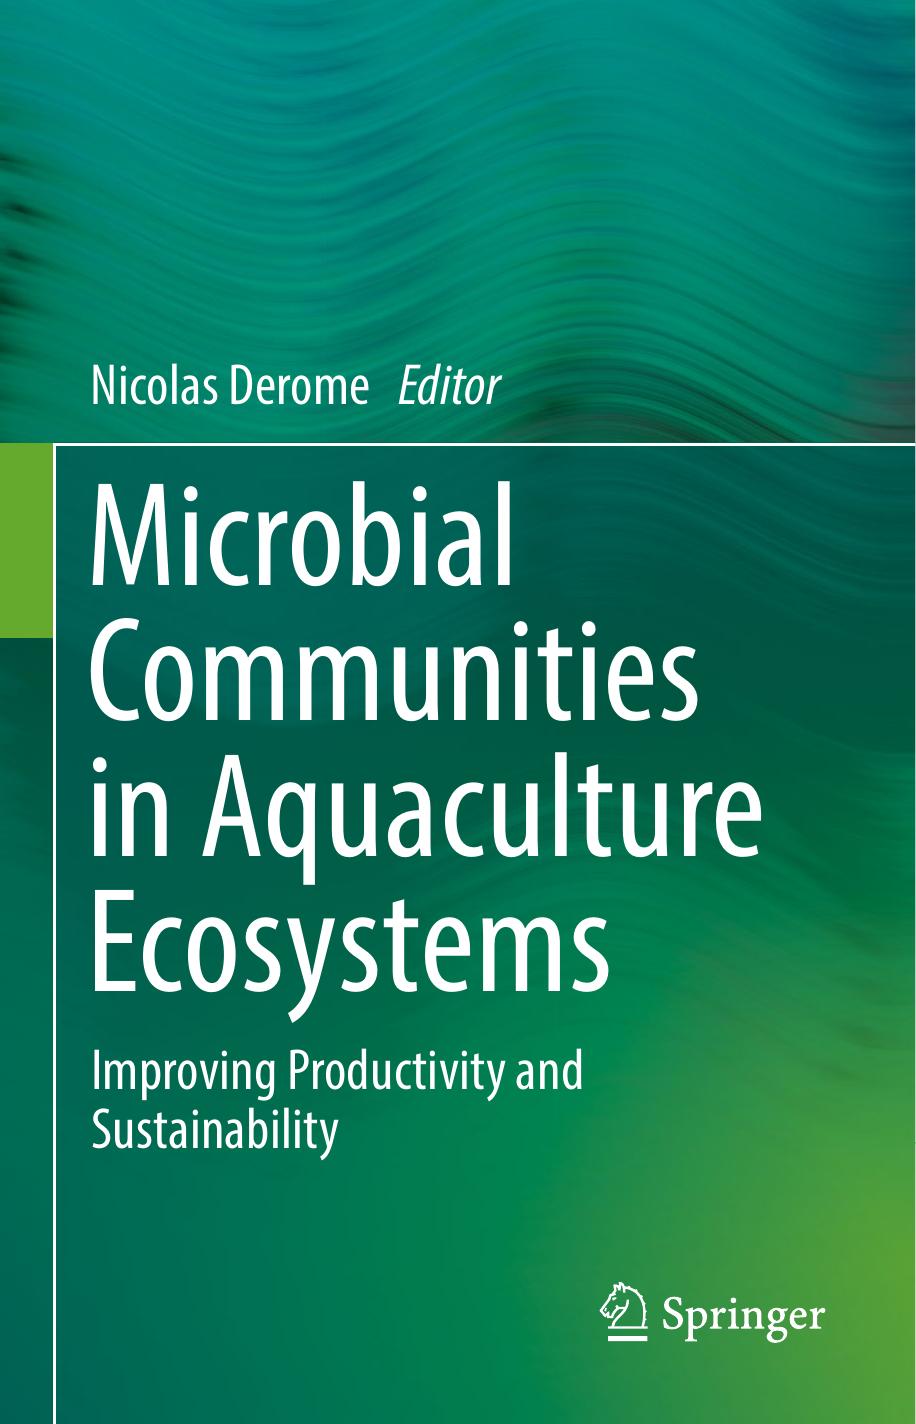 Microbial Communities in Aquaculture Ecosystems  Improving Productivity and Sustainability-Springer International Publishing (2019)